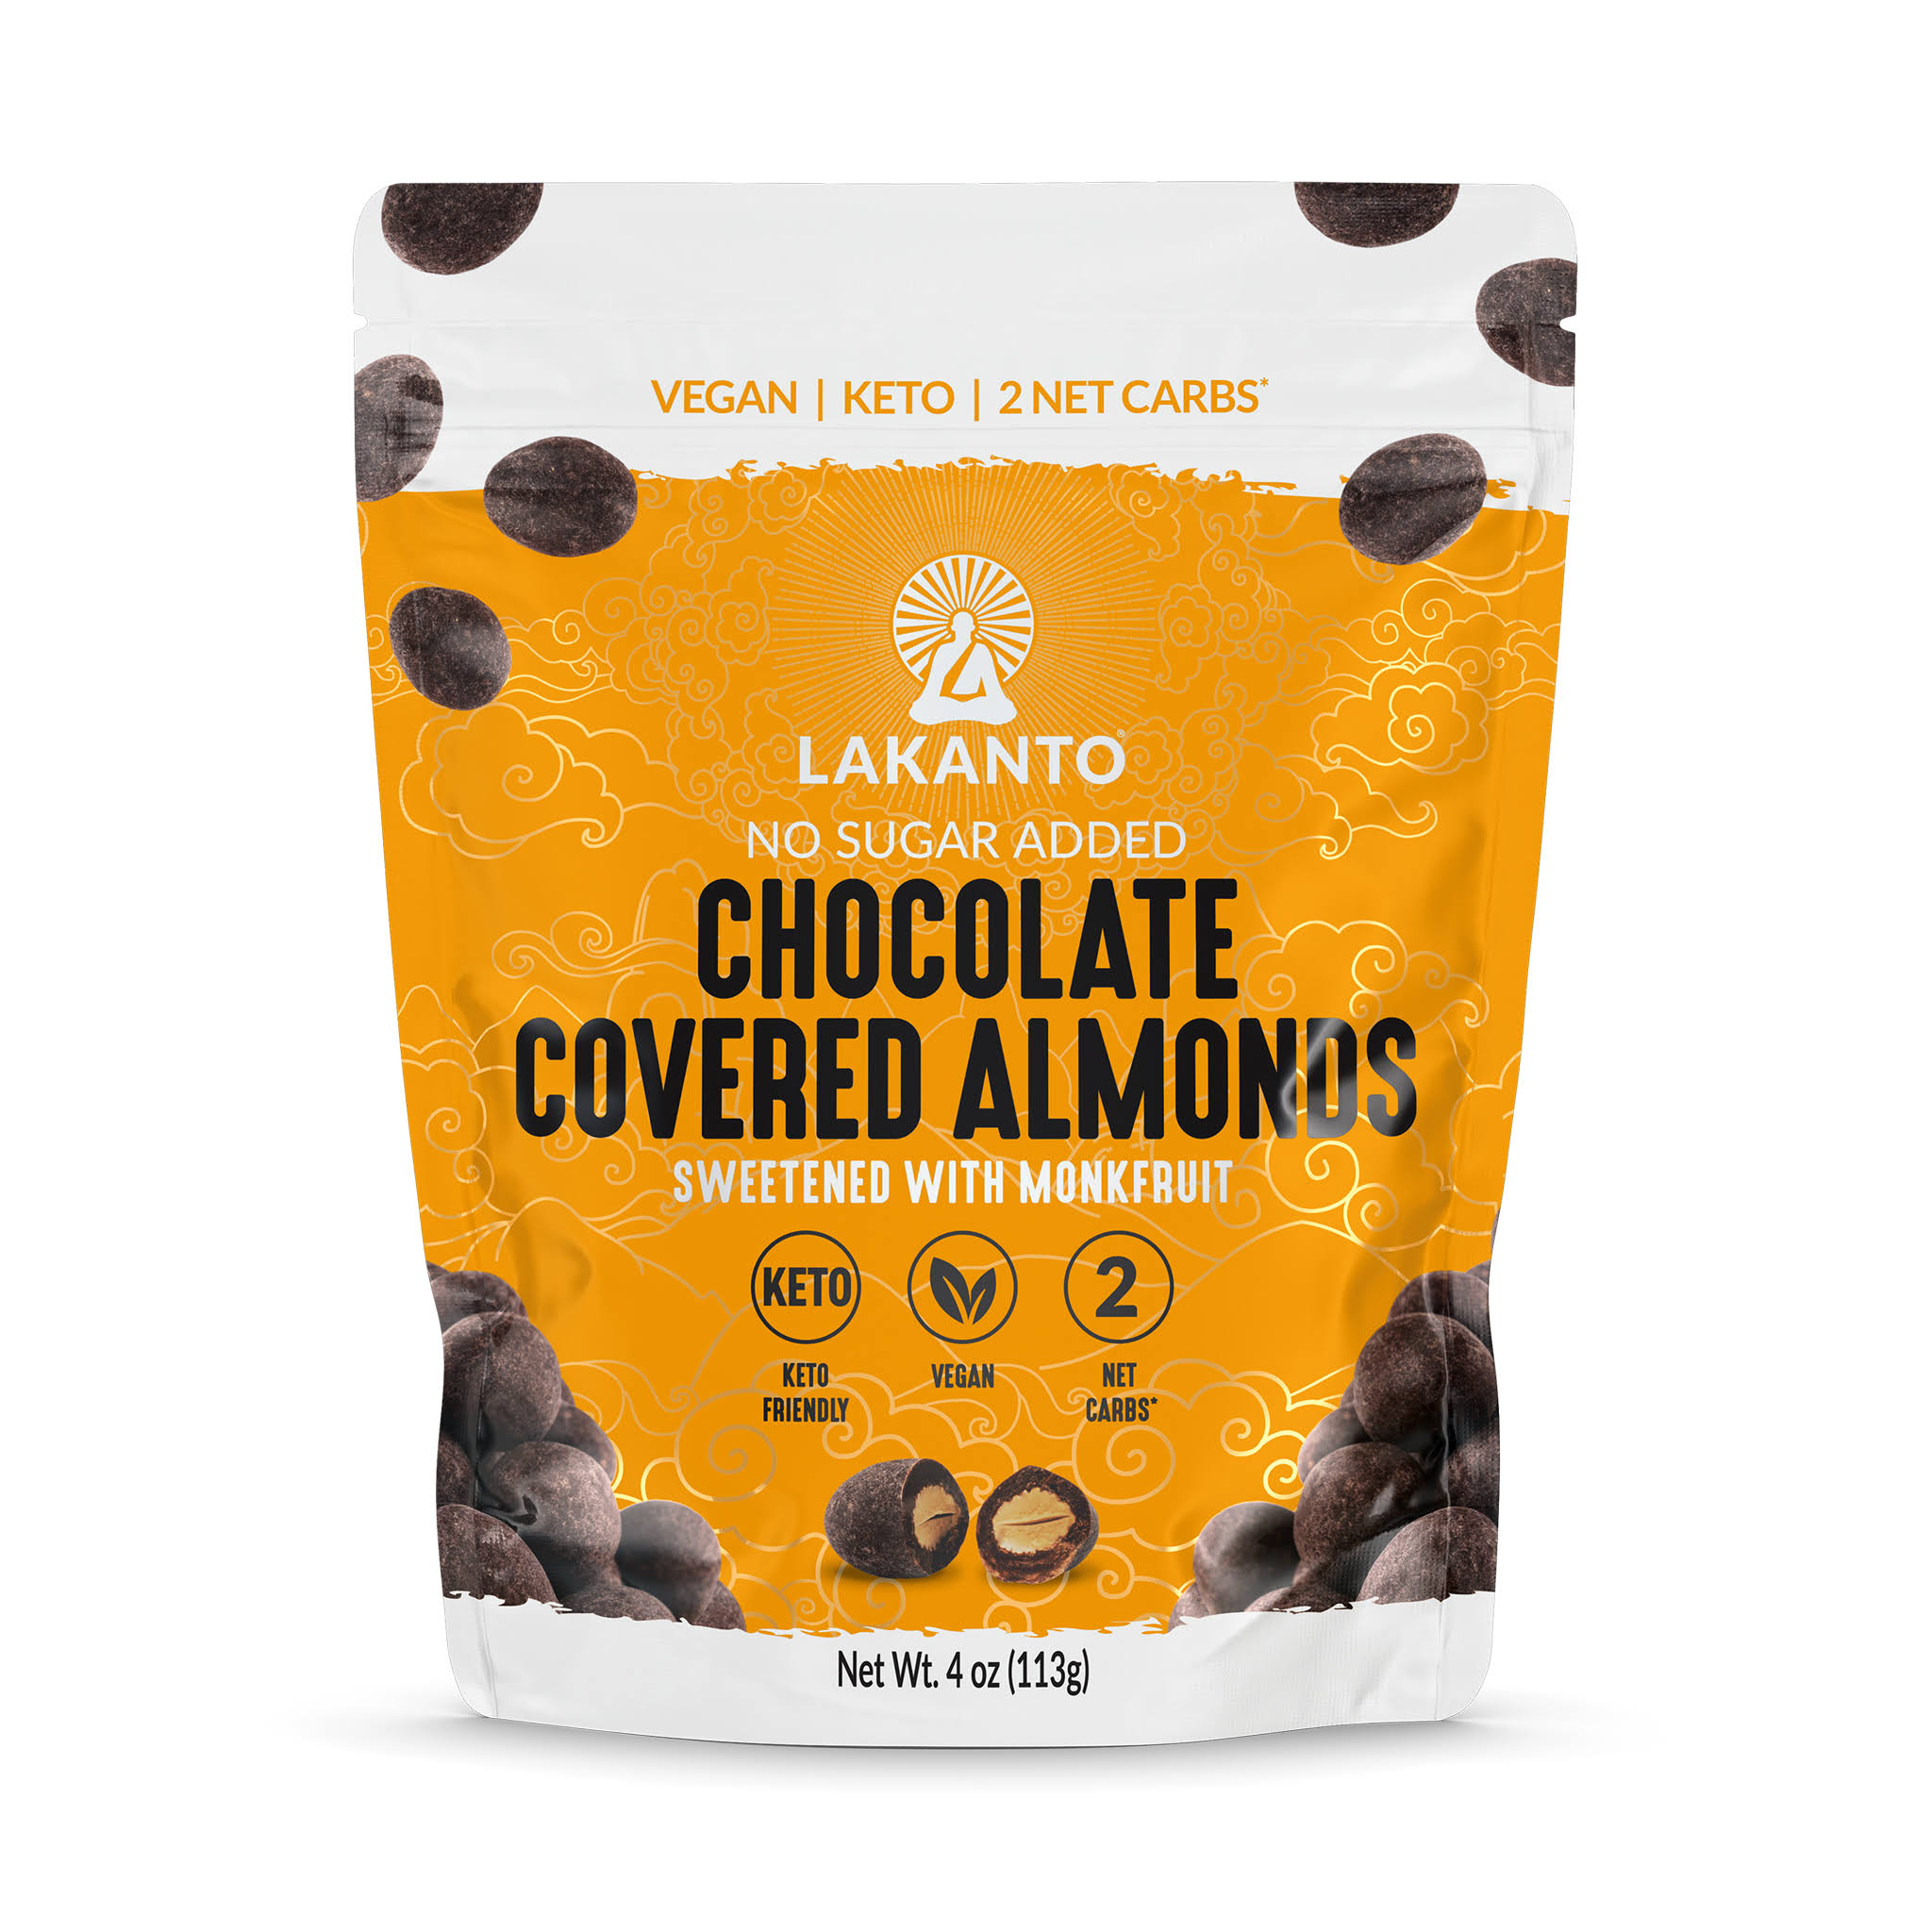 Lakanto Chocolate Covered Almonds - Sweetened with Monk Fruit Sweetener, Keto Diet Friendly, On The Go Healthy Snack, Vegan, 2G Net Carbs, Dark